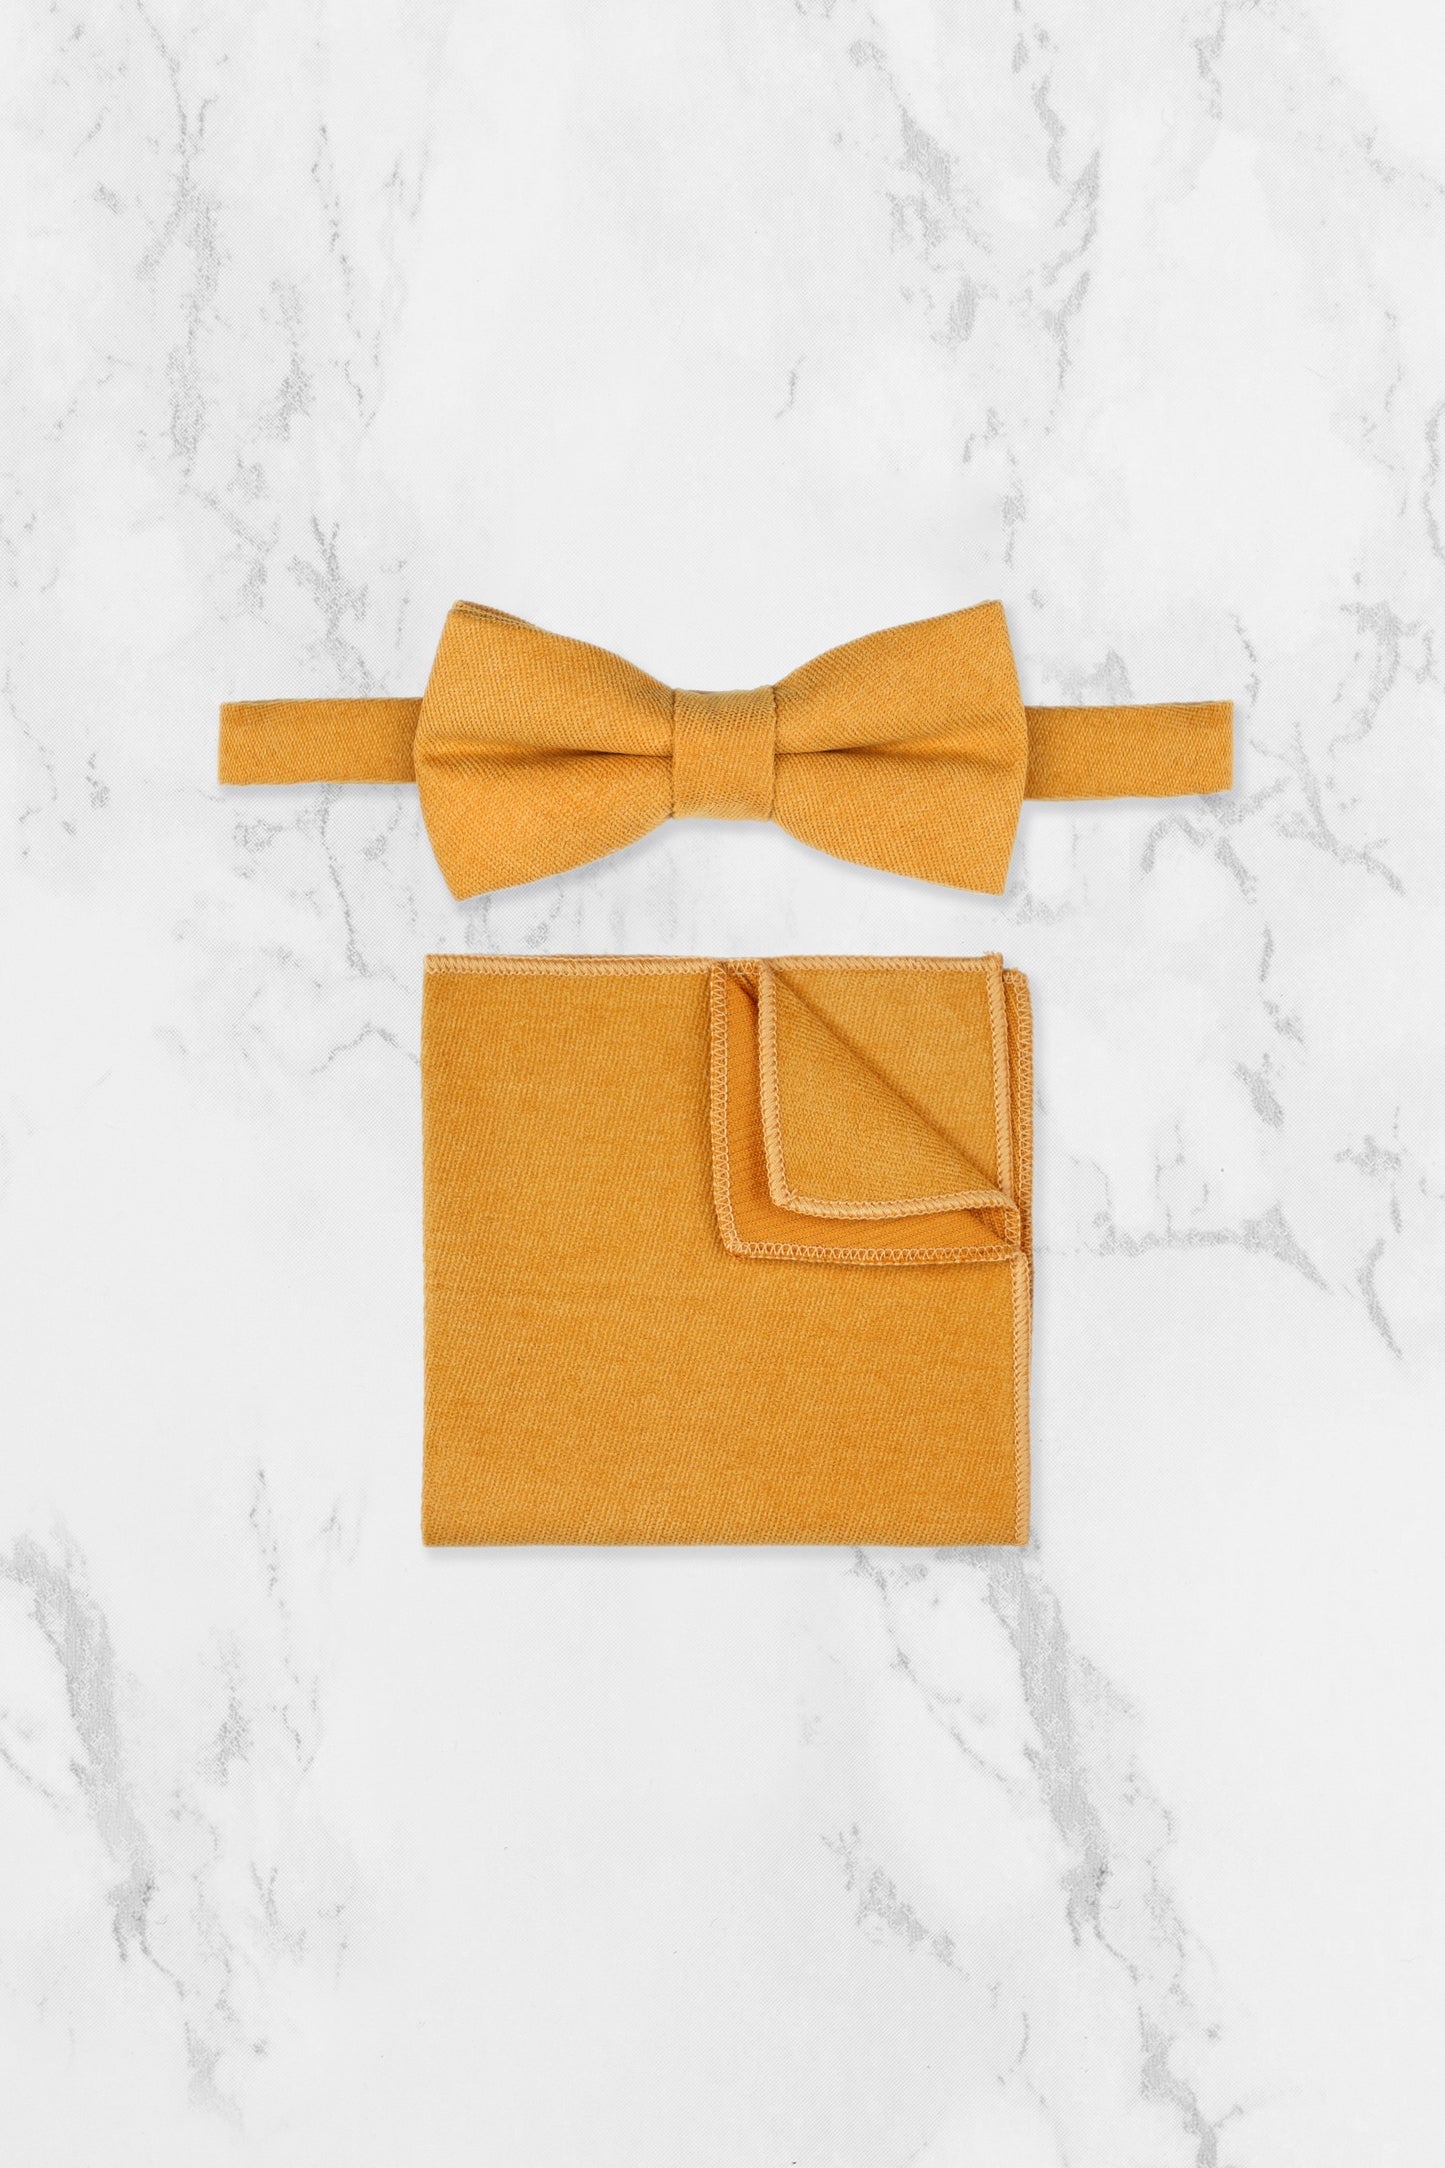 100% Brushed Cotton Suede Tie - Mustard Yellow